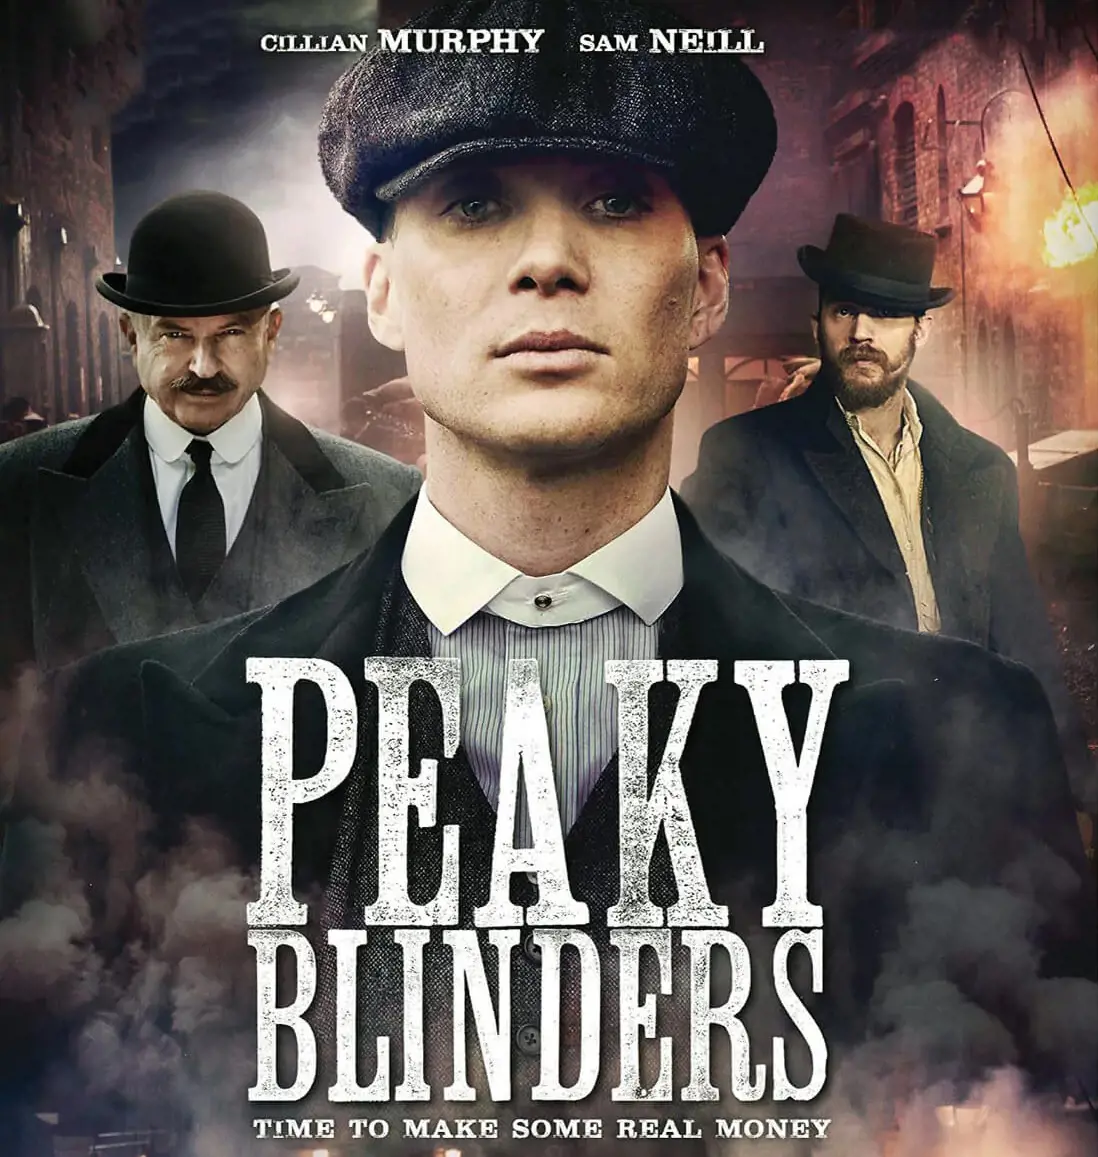 Peaky Blinders is a British period crime drama television series that follows the Shelby's crime family in the aftermath of the First World War.